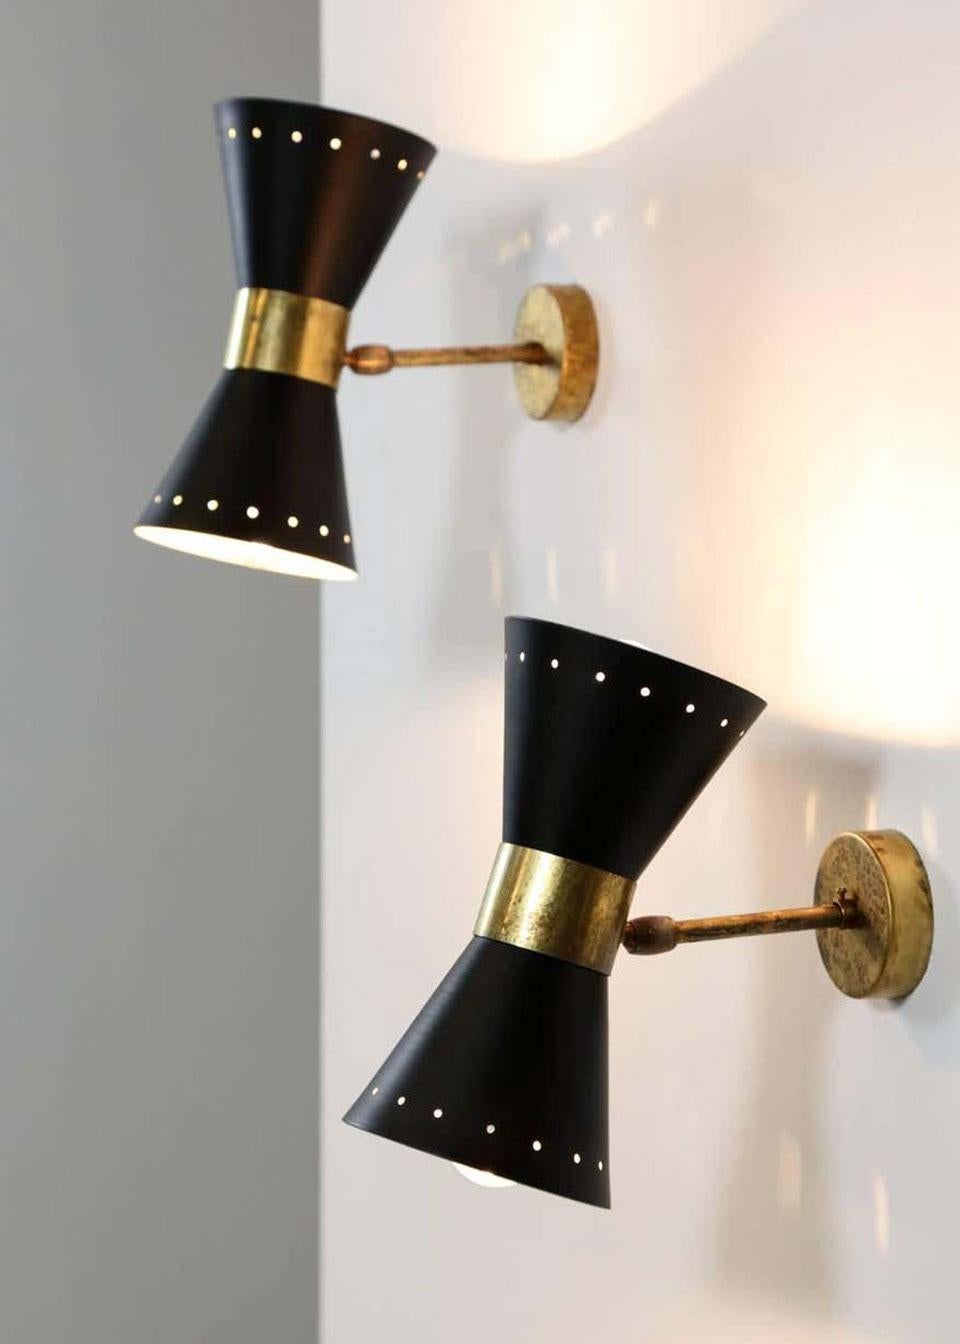 Rare set of gorgeous Italian design Diabolo wall lights of the 1950s in the style of Stilnovo
The patinated brass combines realy well with the black metal shades.
The wall lights have been rewired for daily use and look amazing.
Each wall light